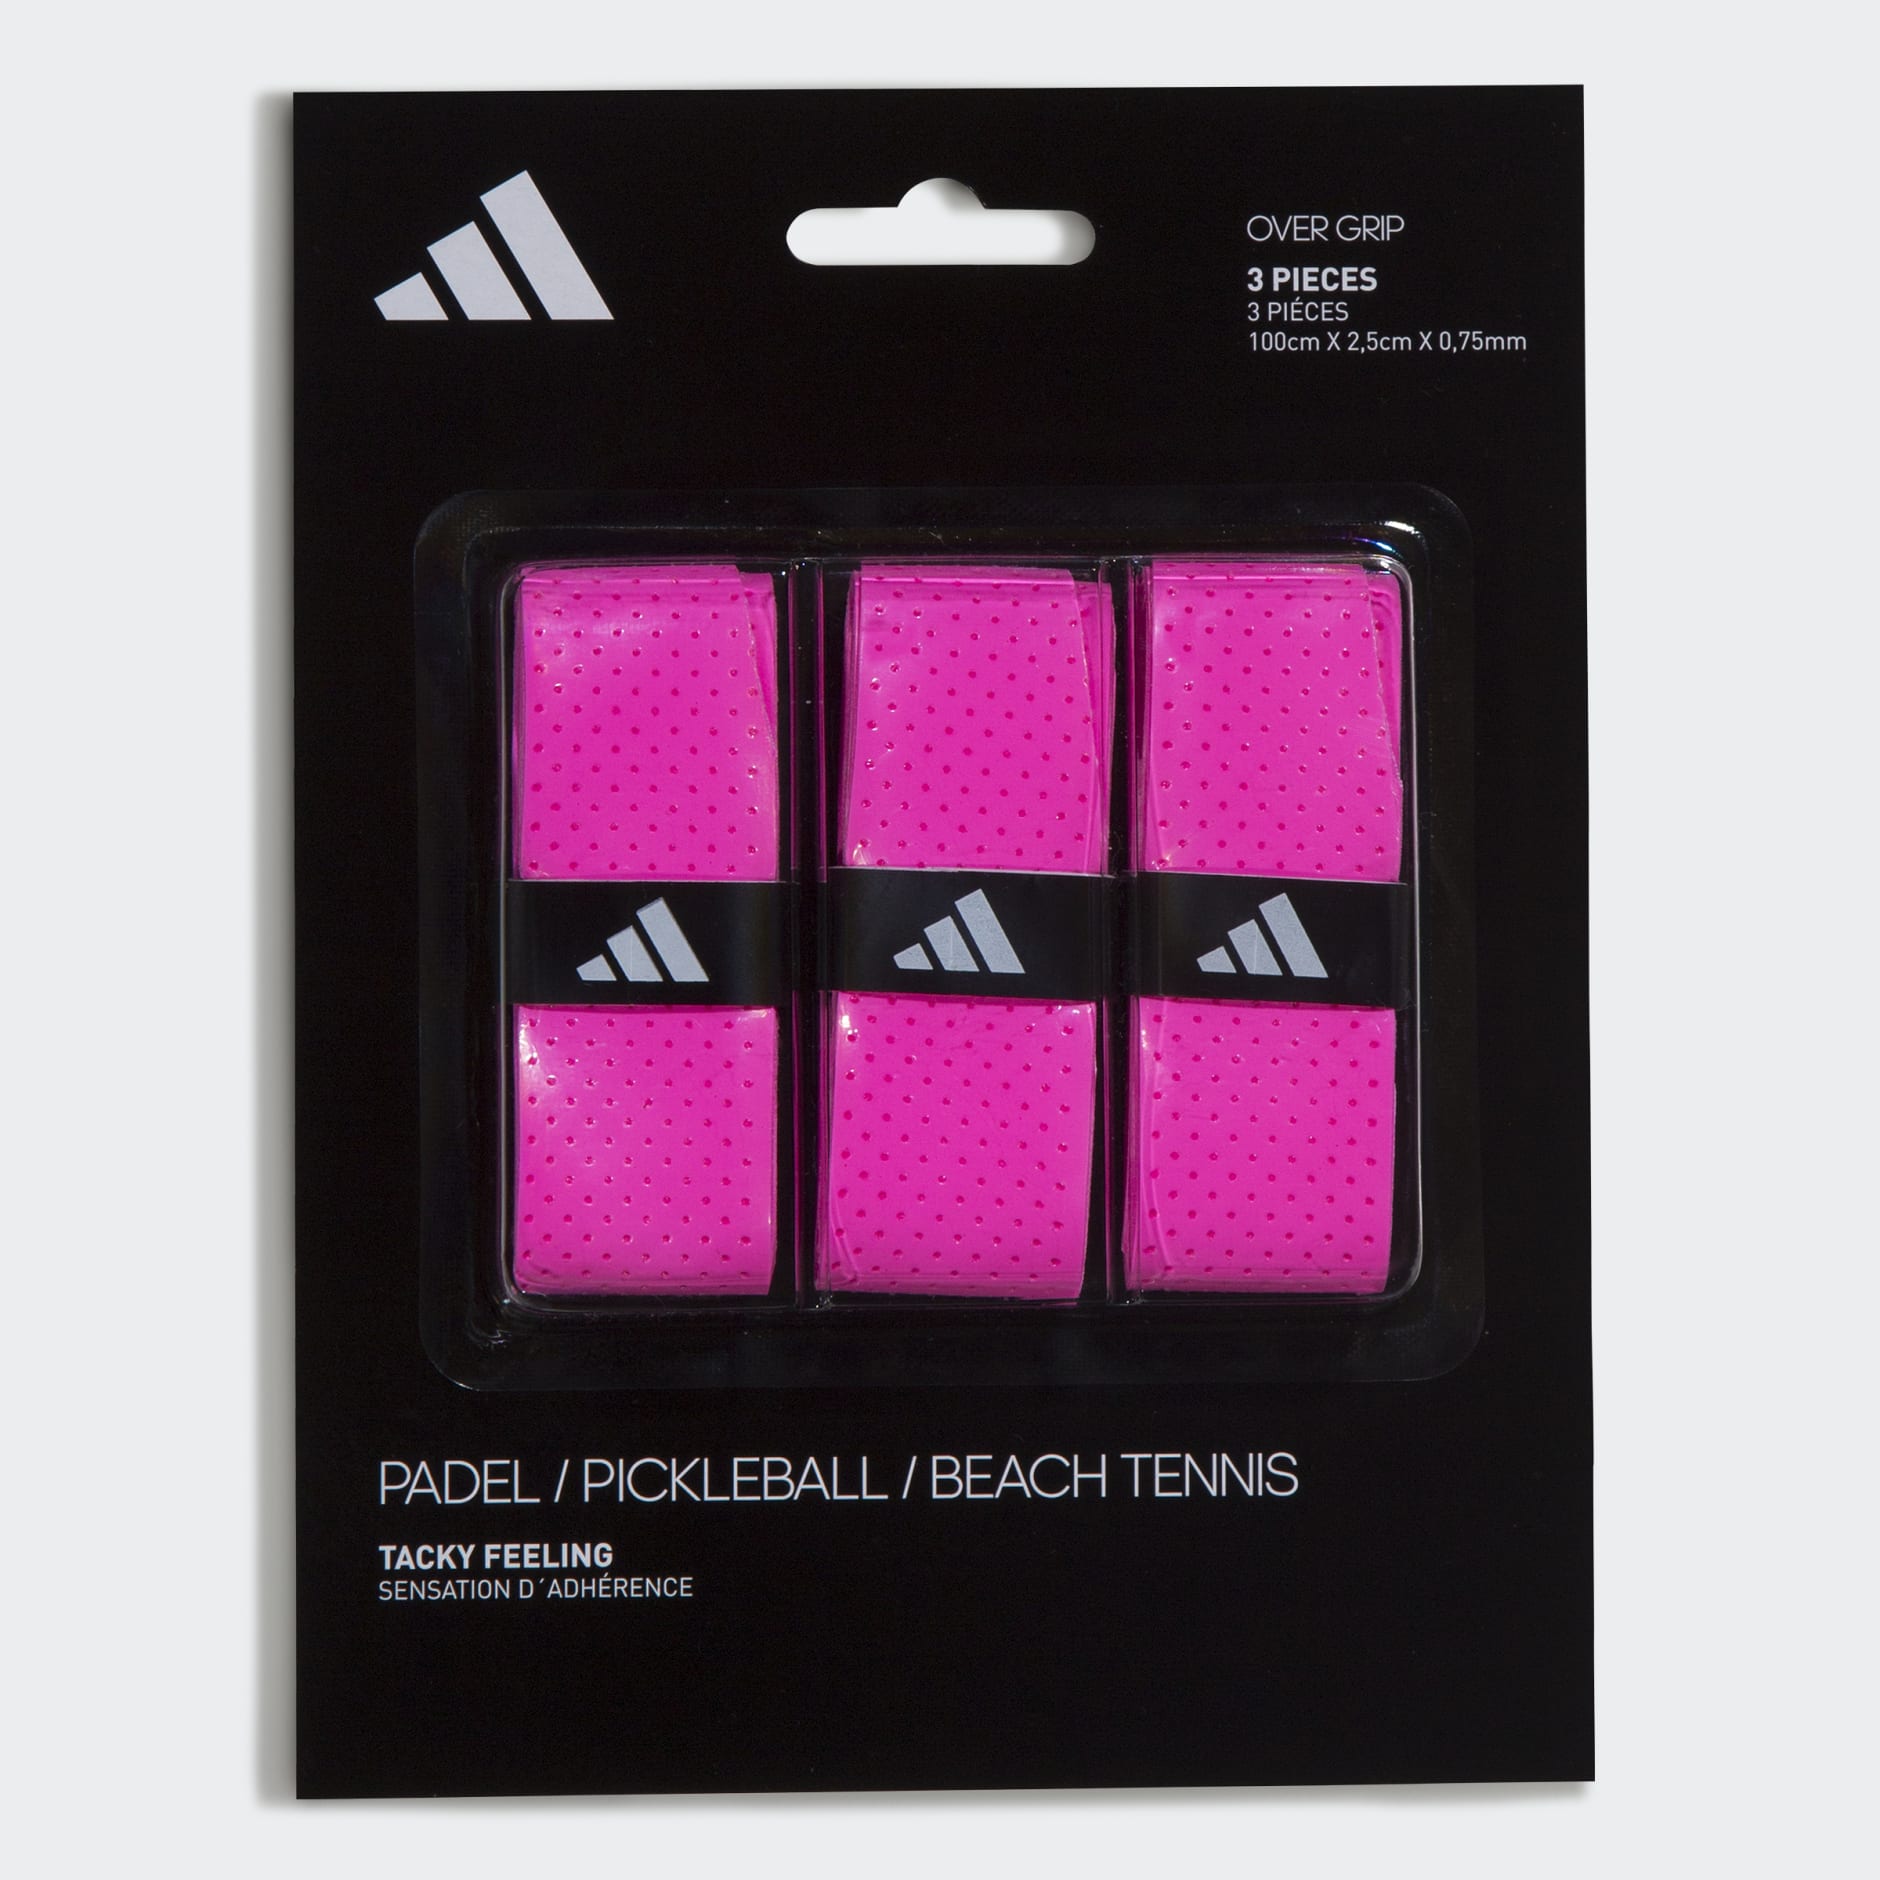 Accessories - Set of Overgrips (3 Pieces) - Pink